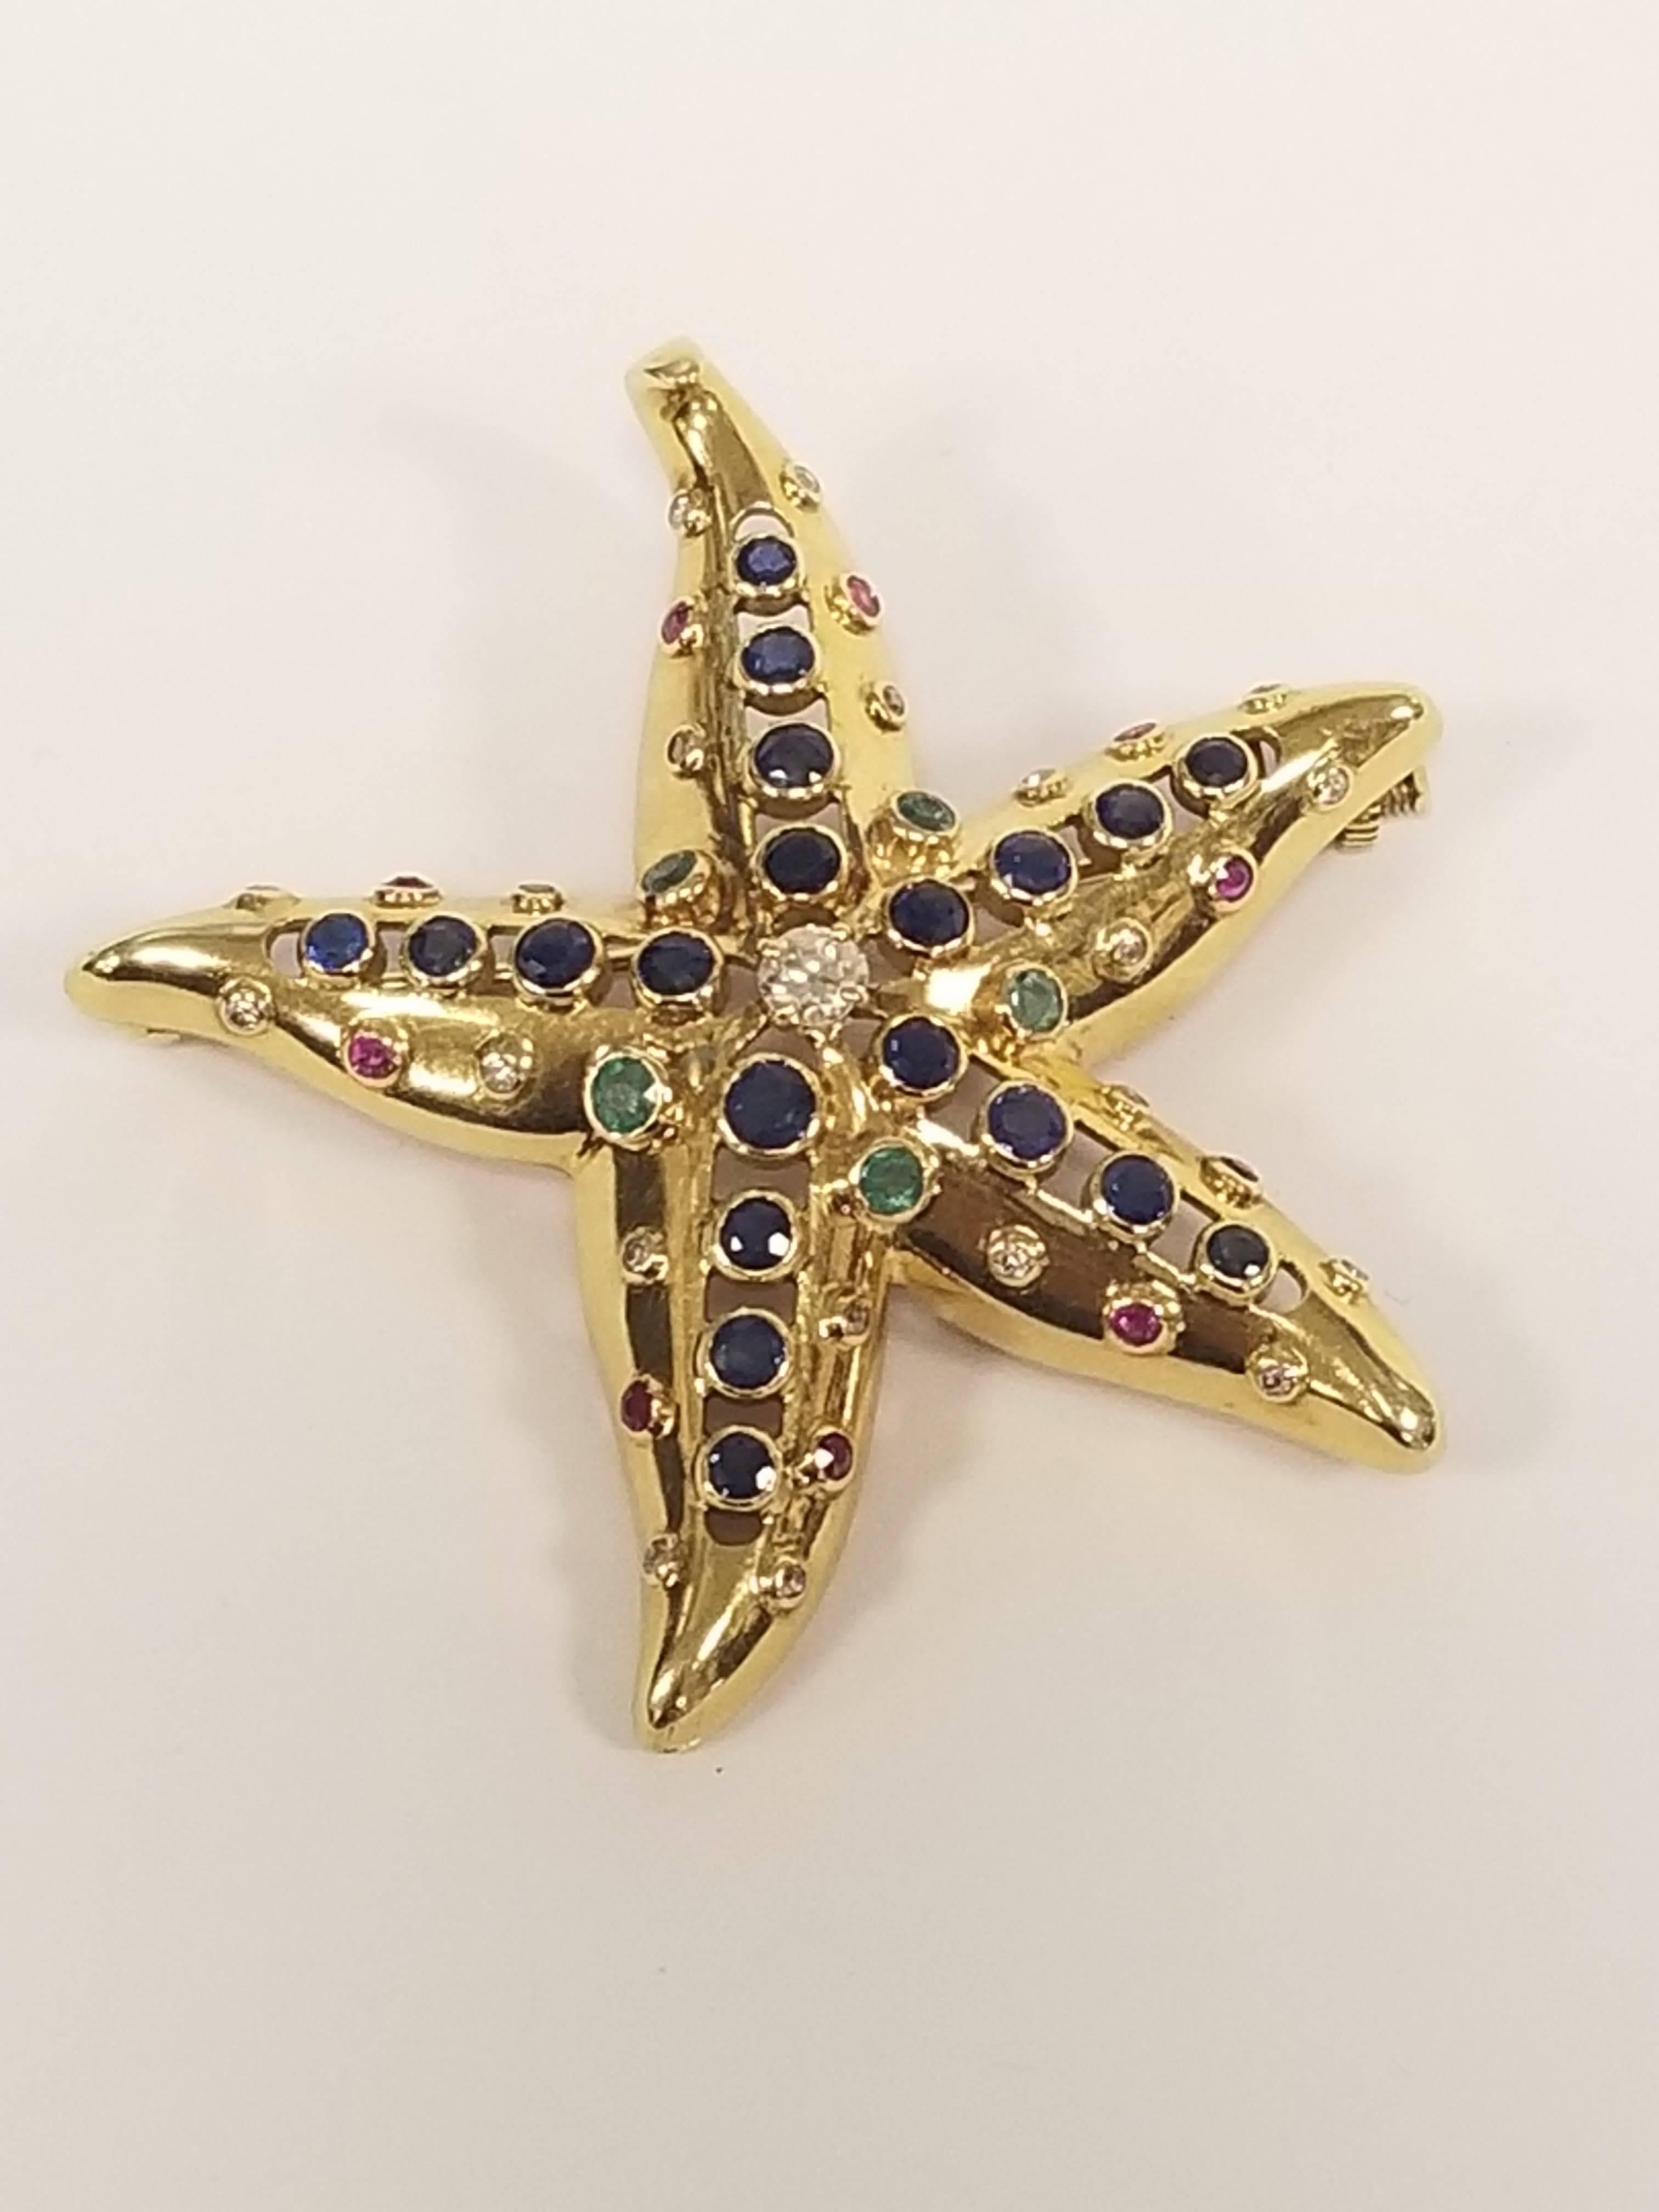 A French 18 karat gold starfish brooch with sapphire, diamond, emerald and ruby by René Boivin. The brooch has 20 sapphires with an approximate total weight of 1.55 carats, 21 diamonds with an approximate total weight of .65 carat, 5 emeralds with